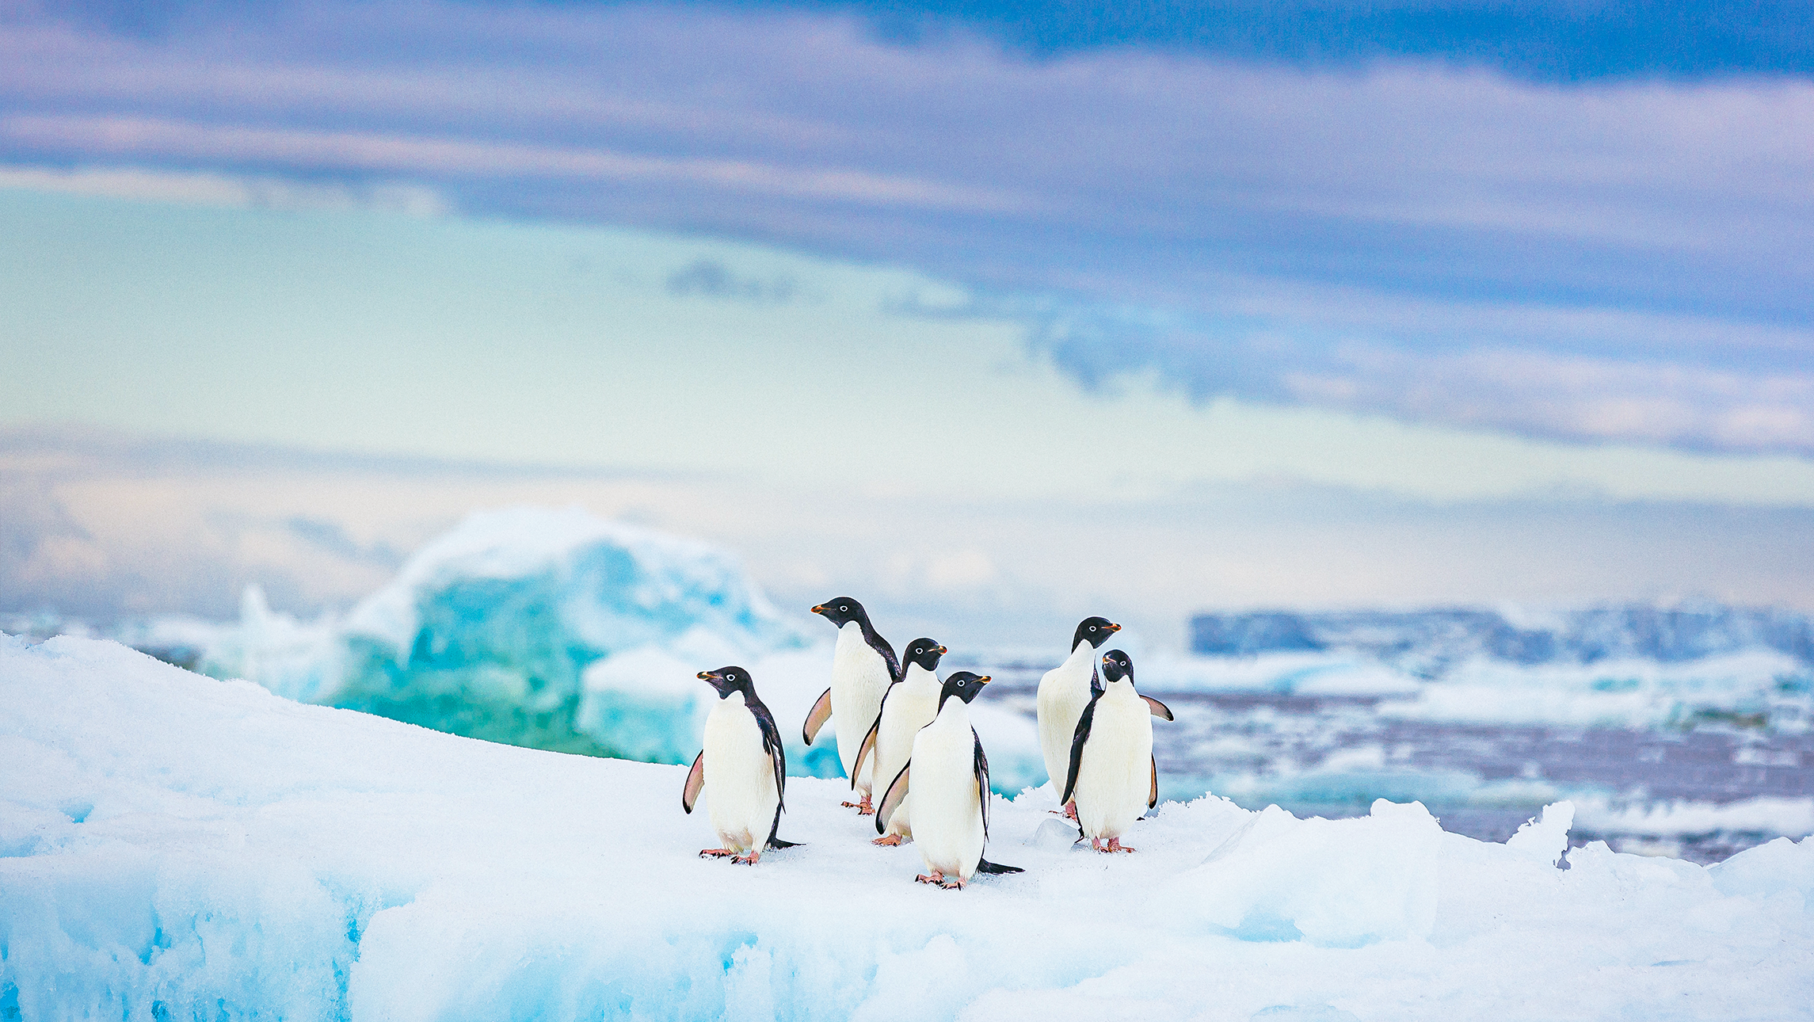 Six Adelie penguins sitting on the ice in Antarctica